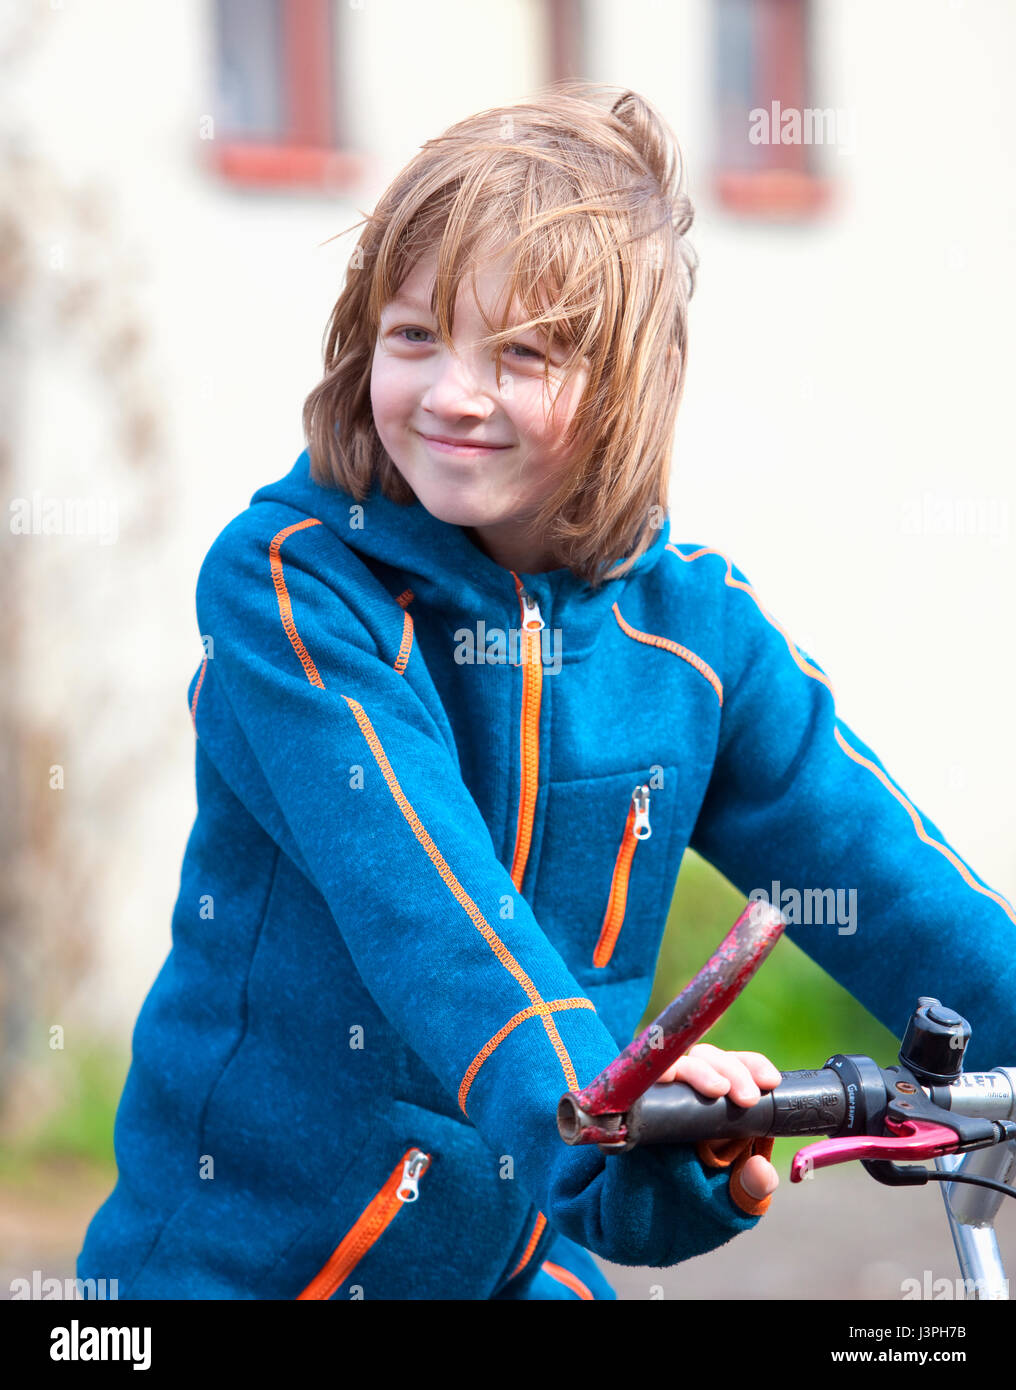 Portrait of a Boy on Bike with Blond Hair Smiling Stock Photo